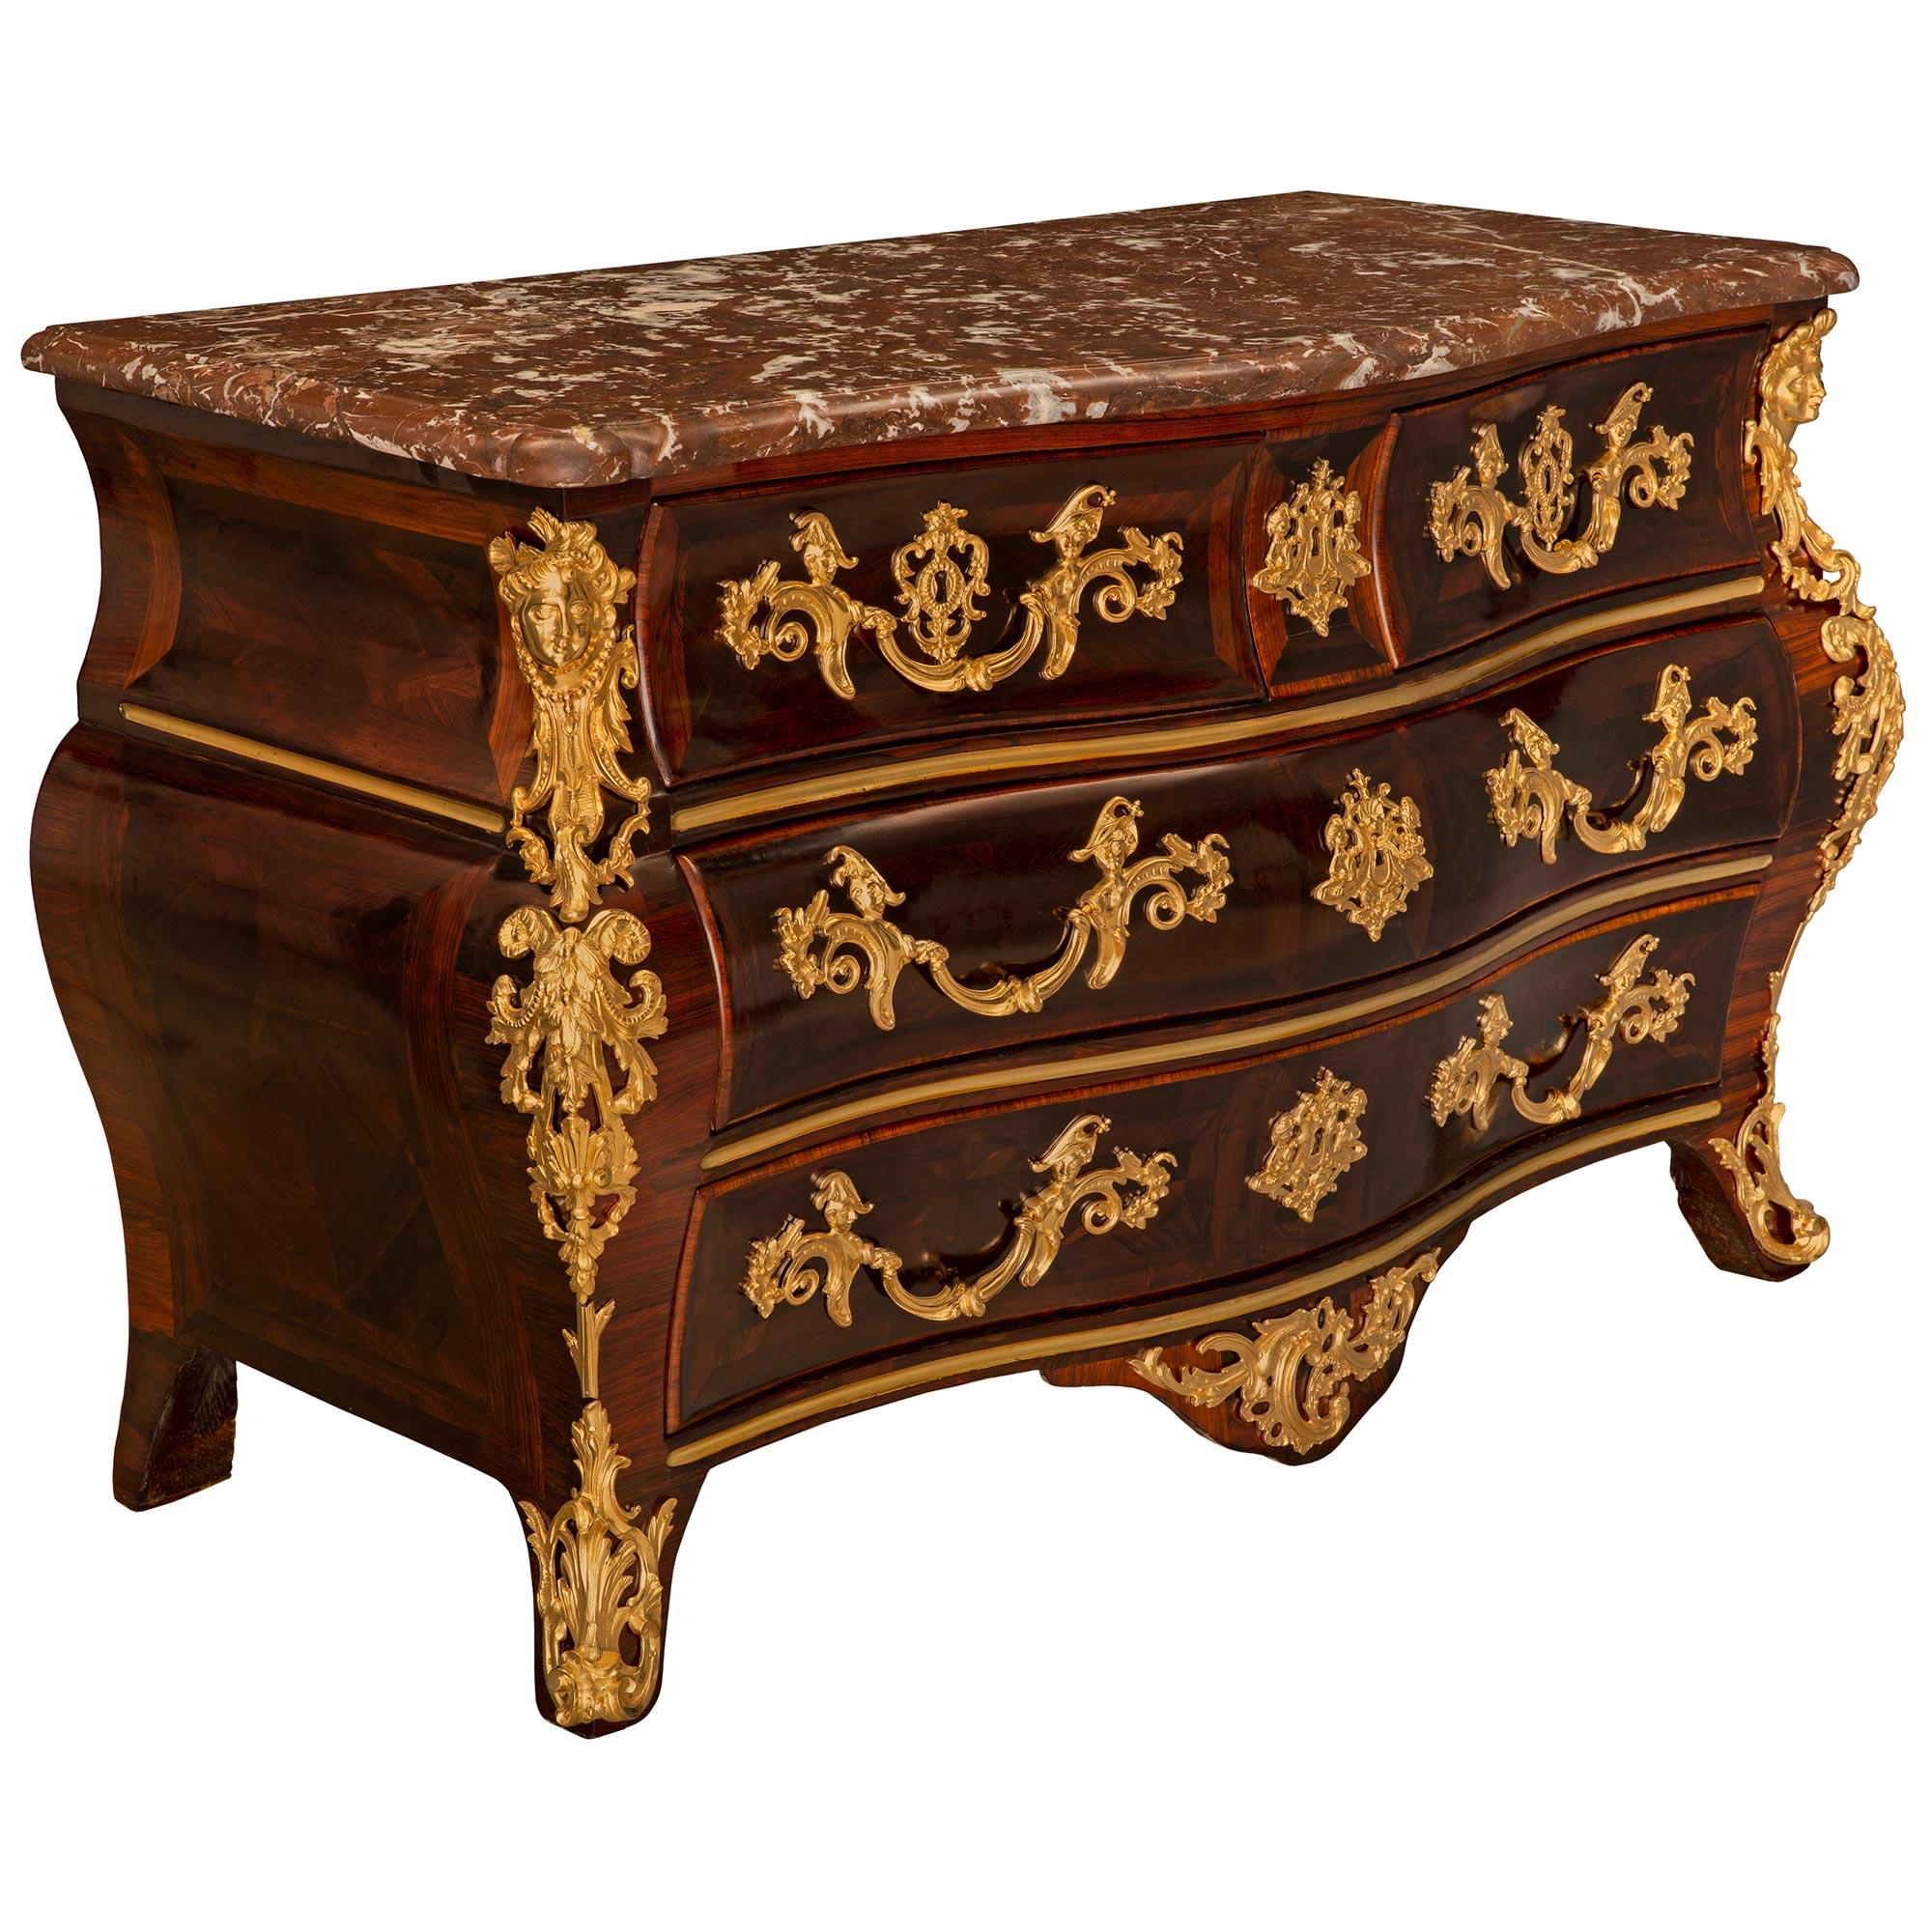 French Mid-18th Century Régence Period Rosewood, Ormolu and Marble Commode In Good Condition For Sale In West Palm Beach, FL